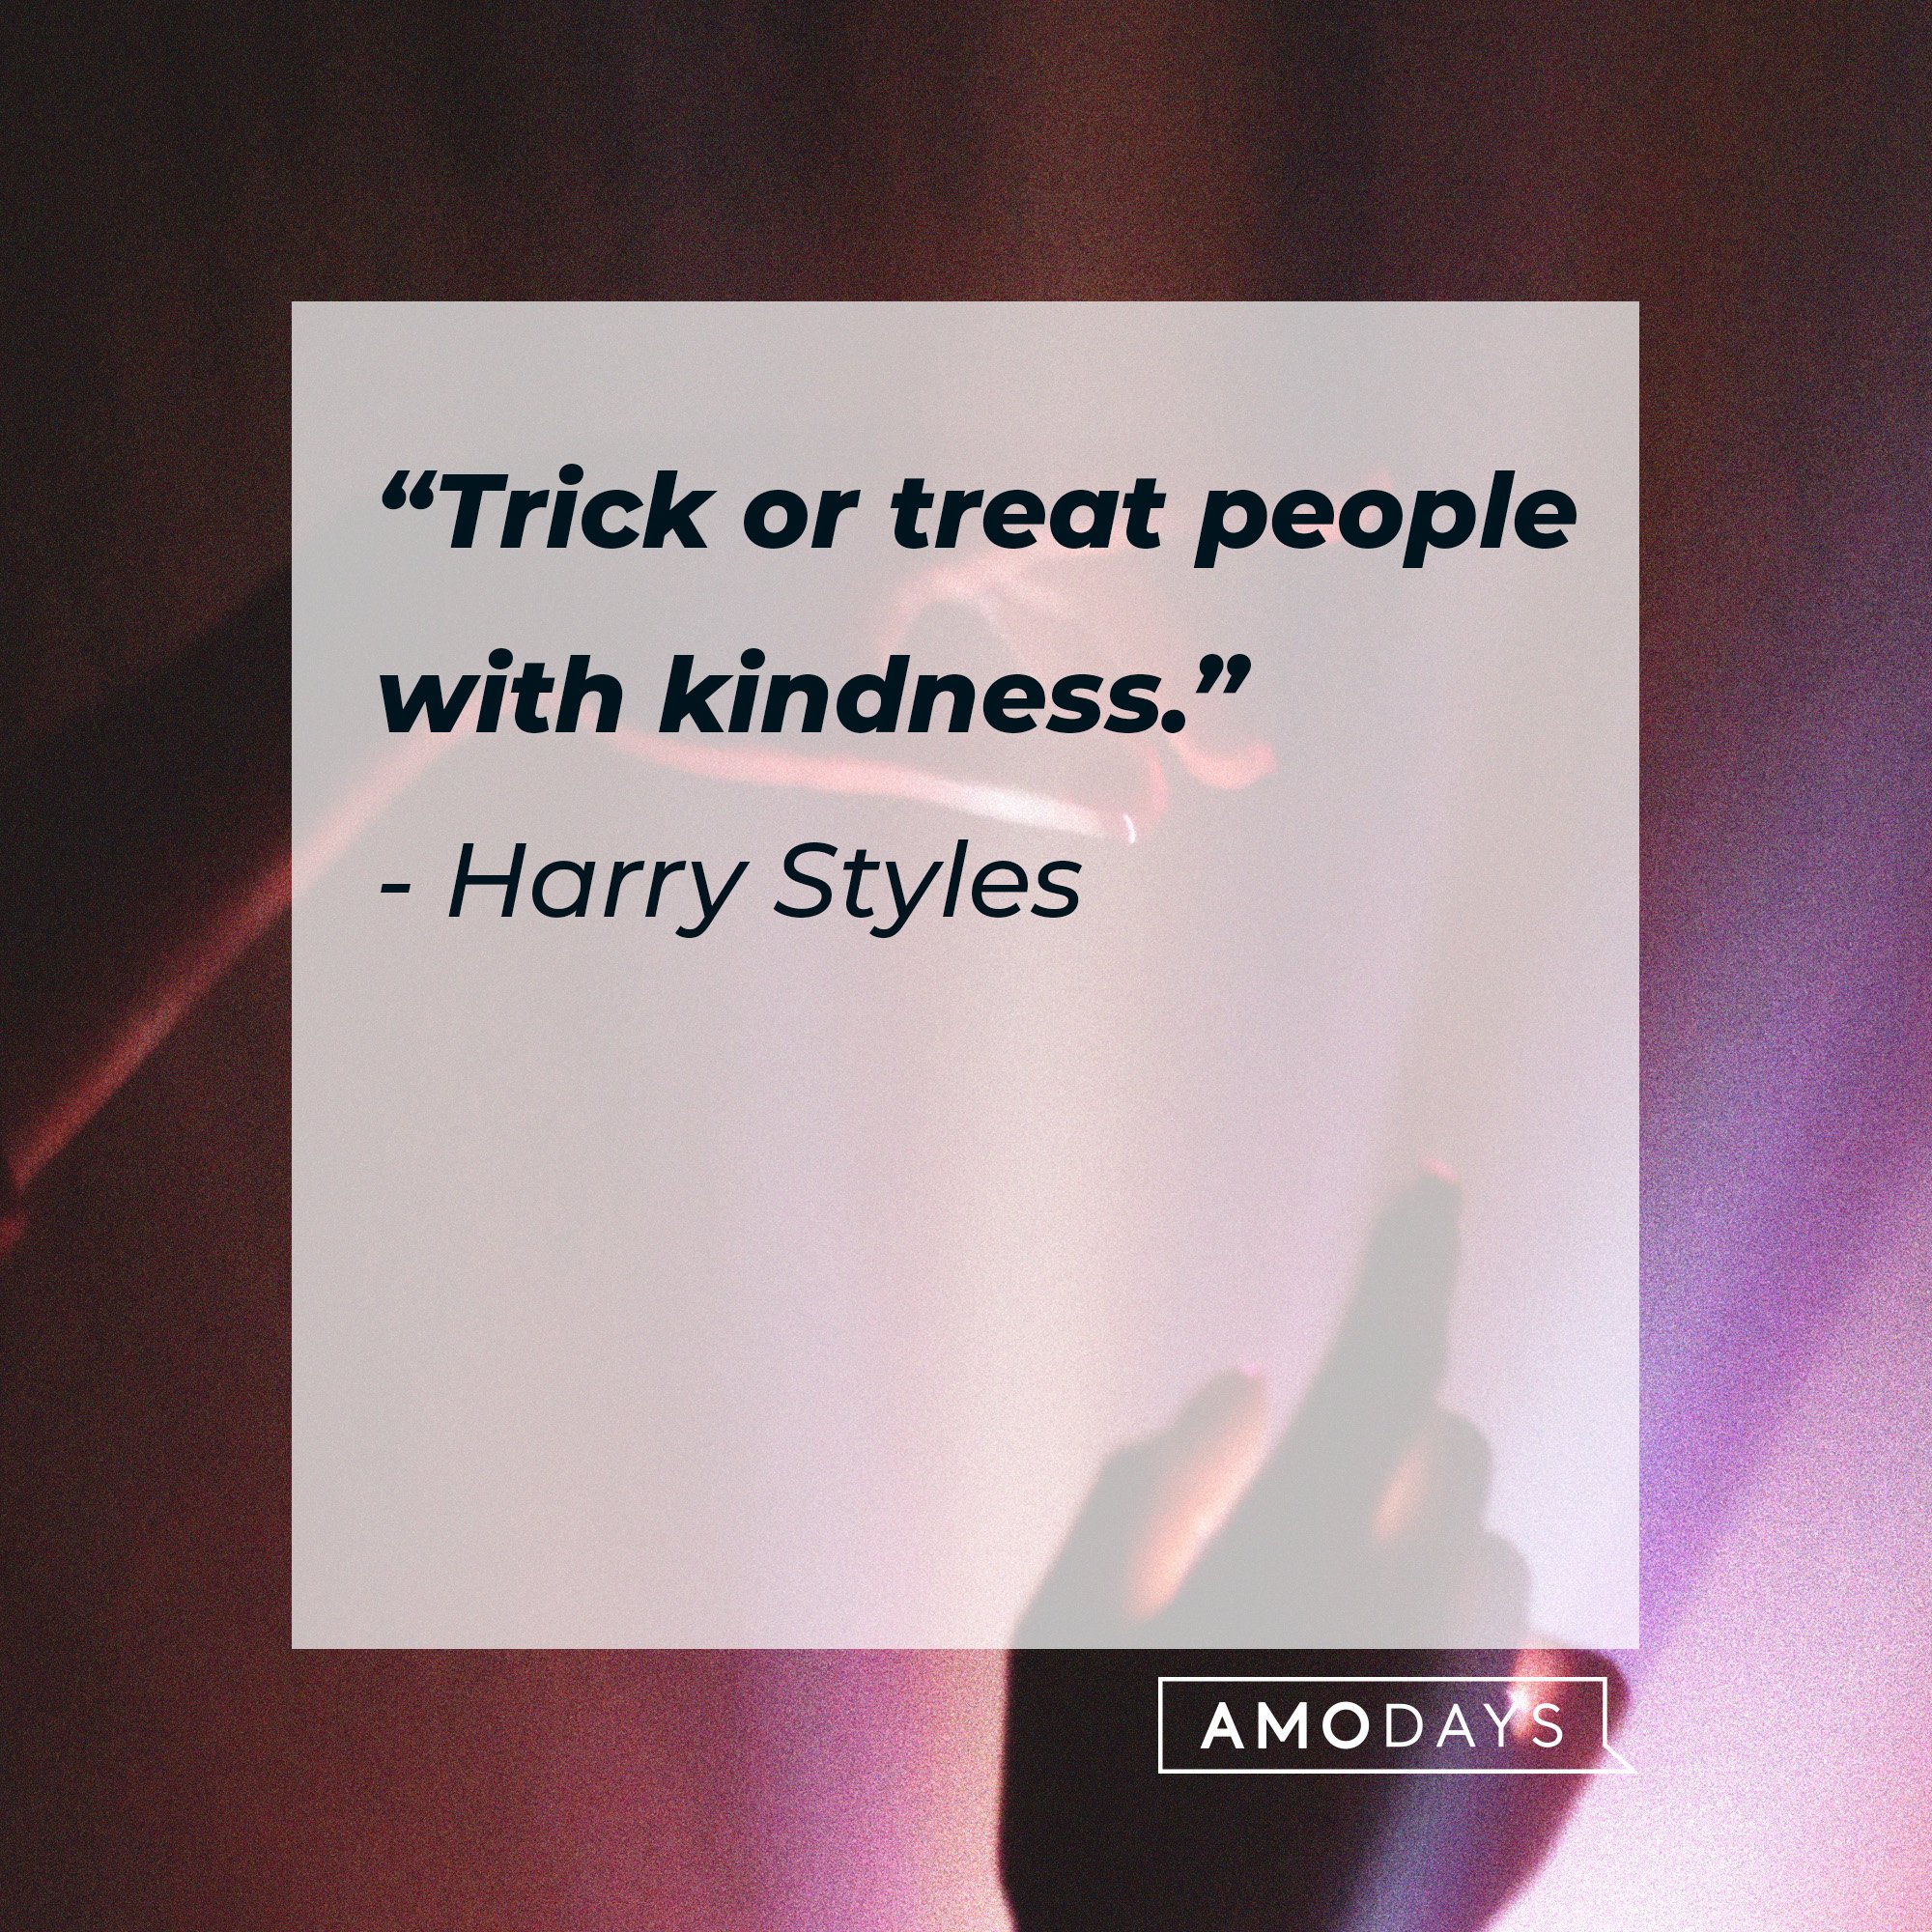 Harry Styles’ quote: “Trick or treat people with kindness.” | Source: AmoDays